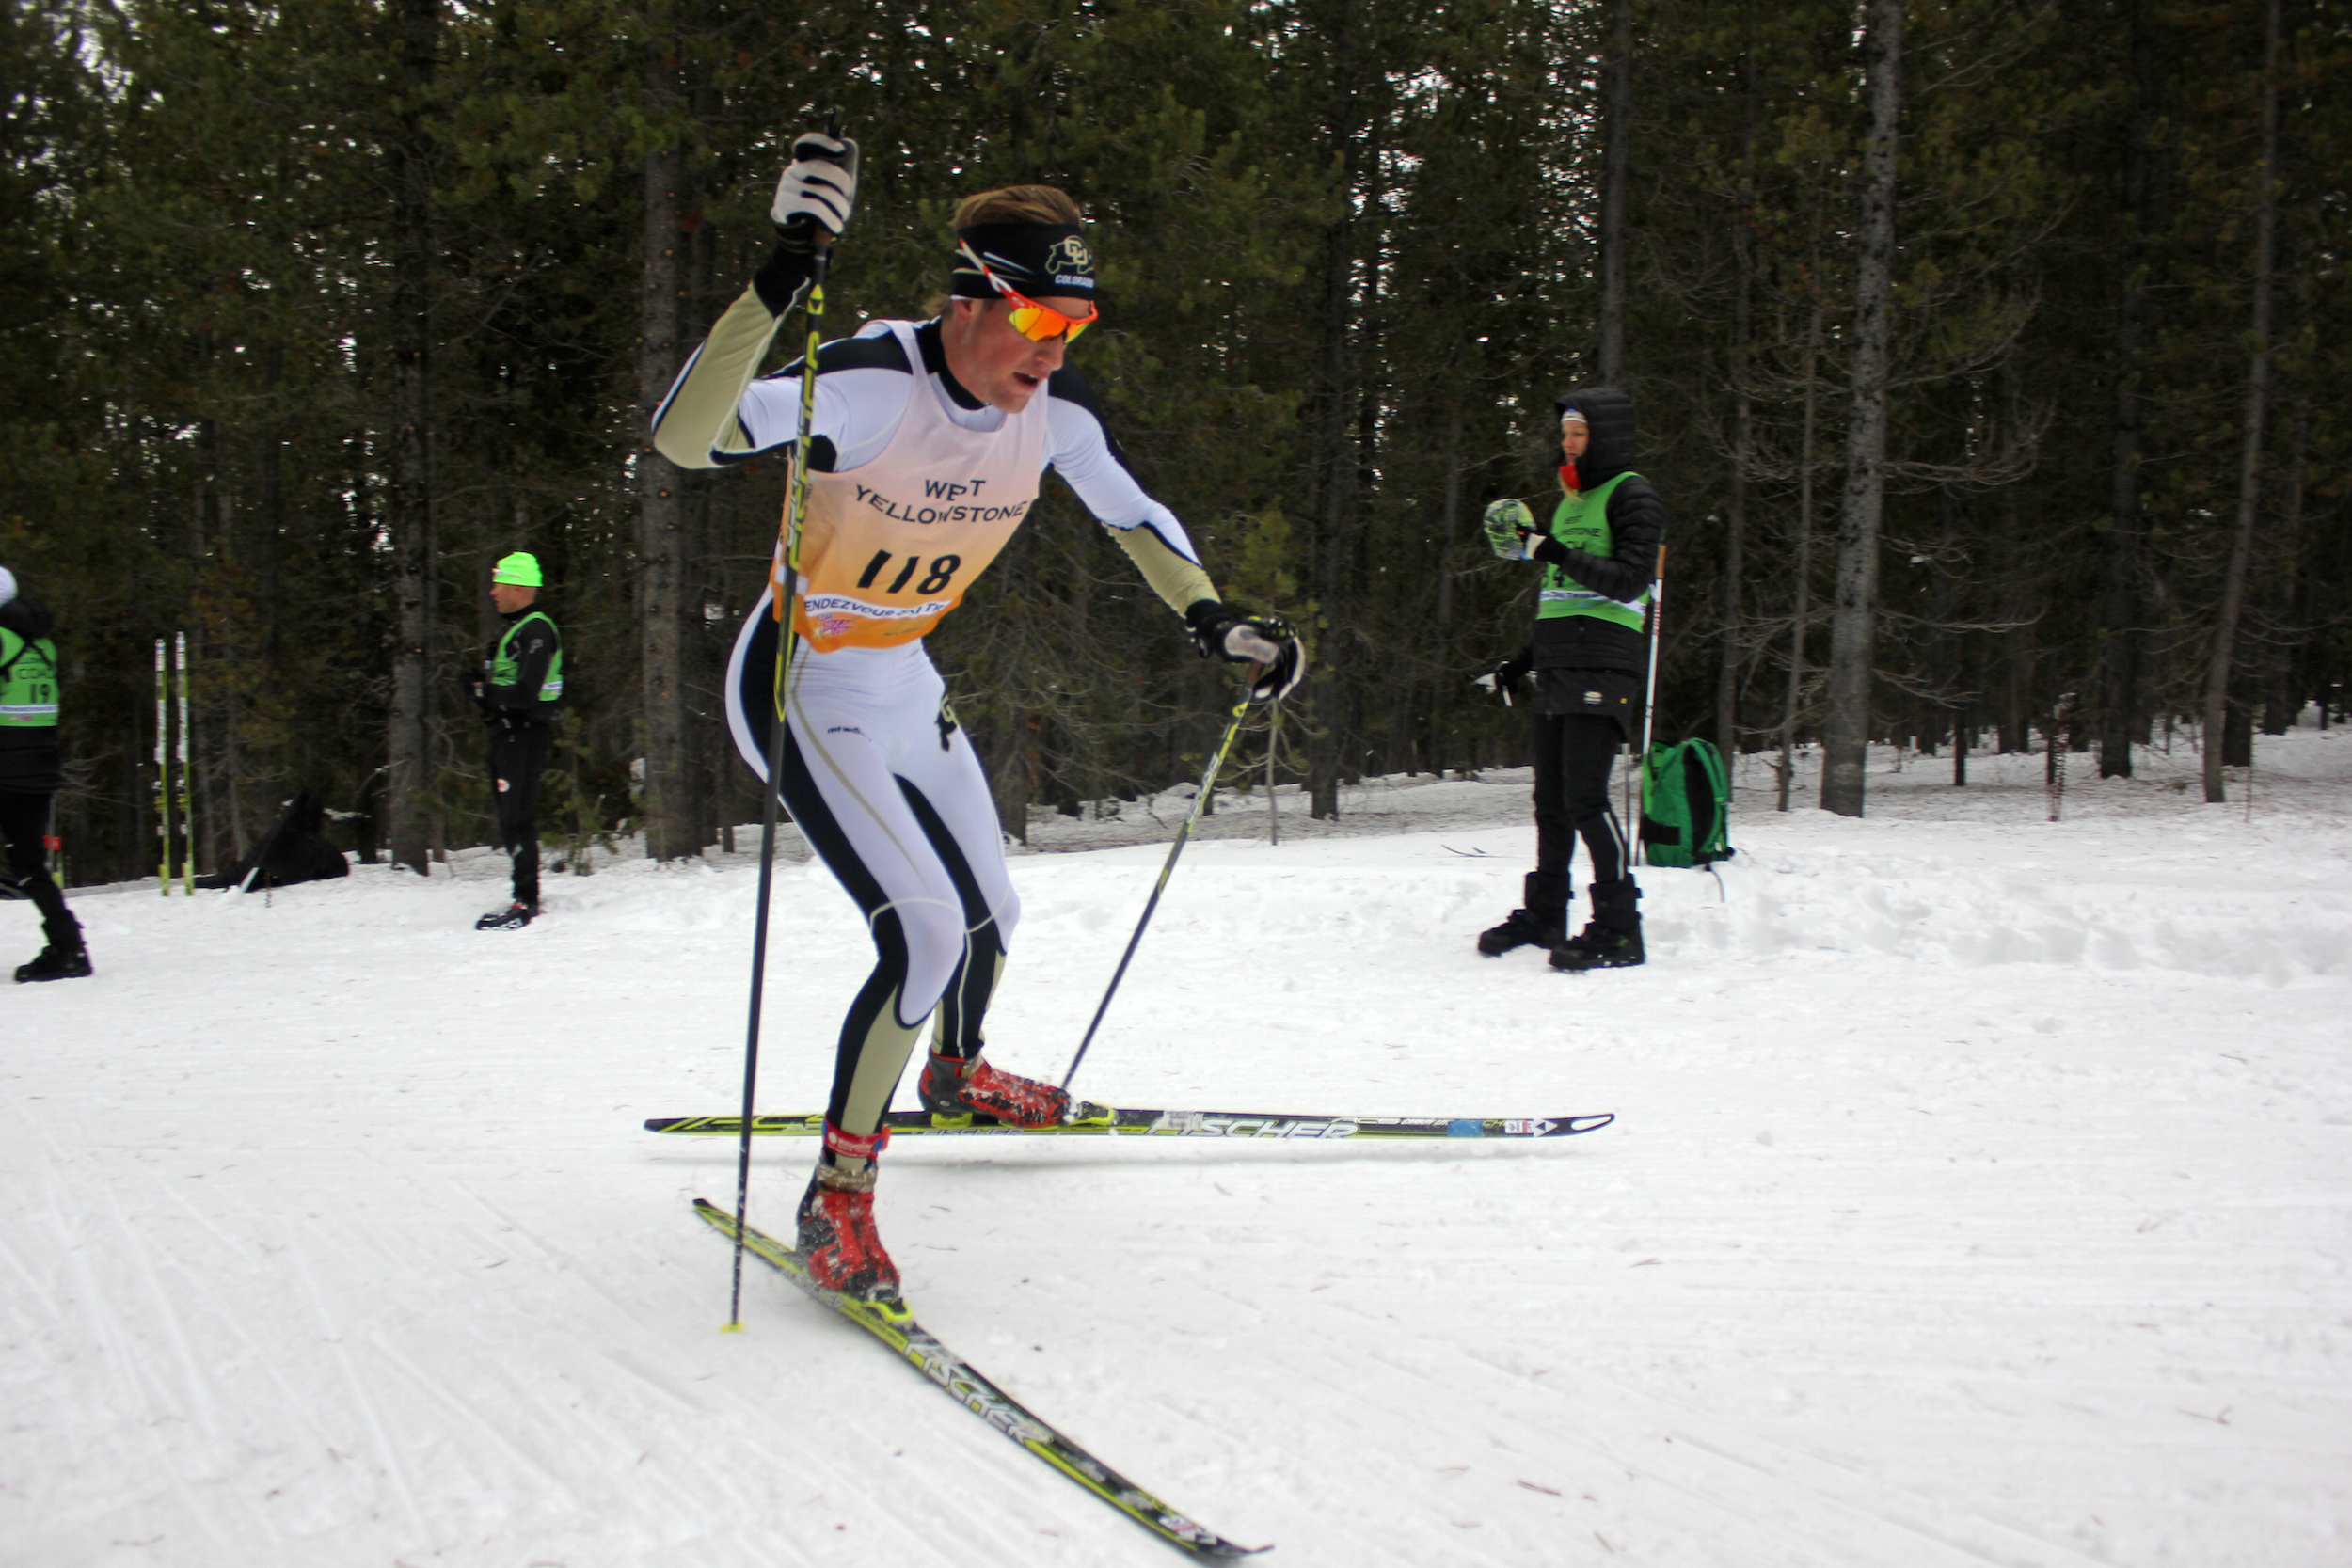 Mads Strom (CU) fought for first but ultimately ended third in the 15 k freestyle in West Yellowstone, Mont. as part of the opening SuperTour weekend.